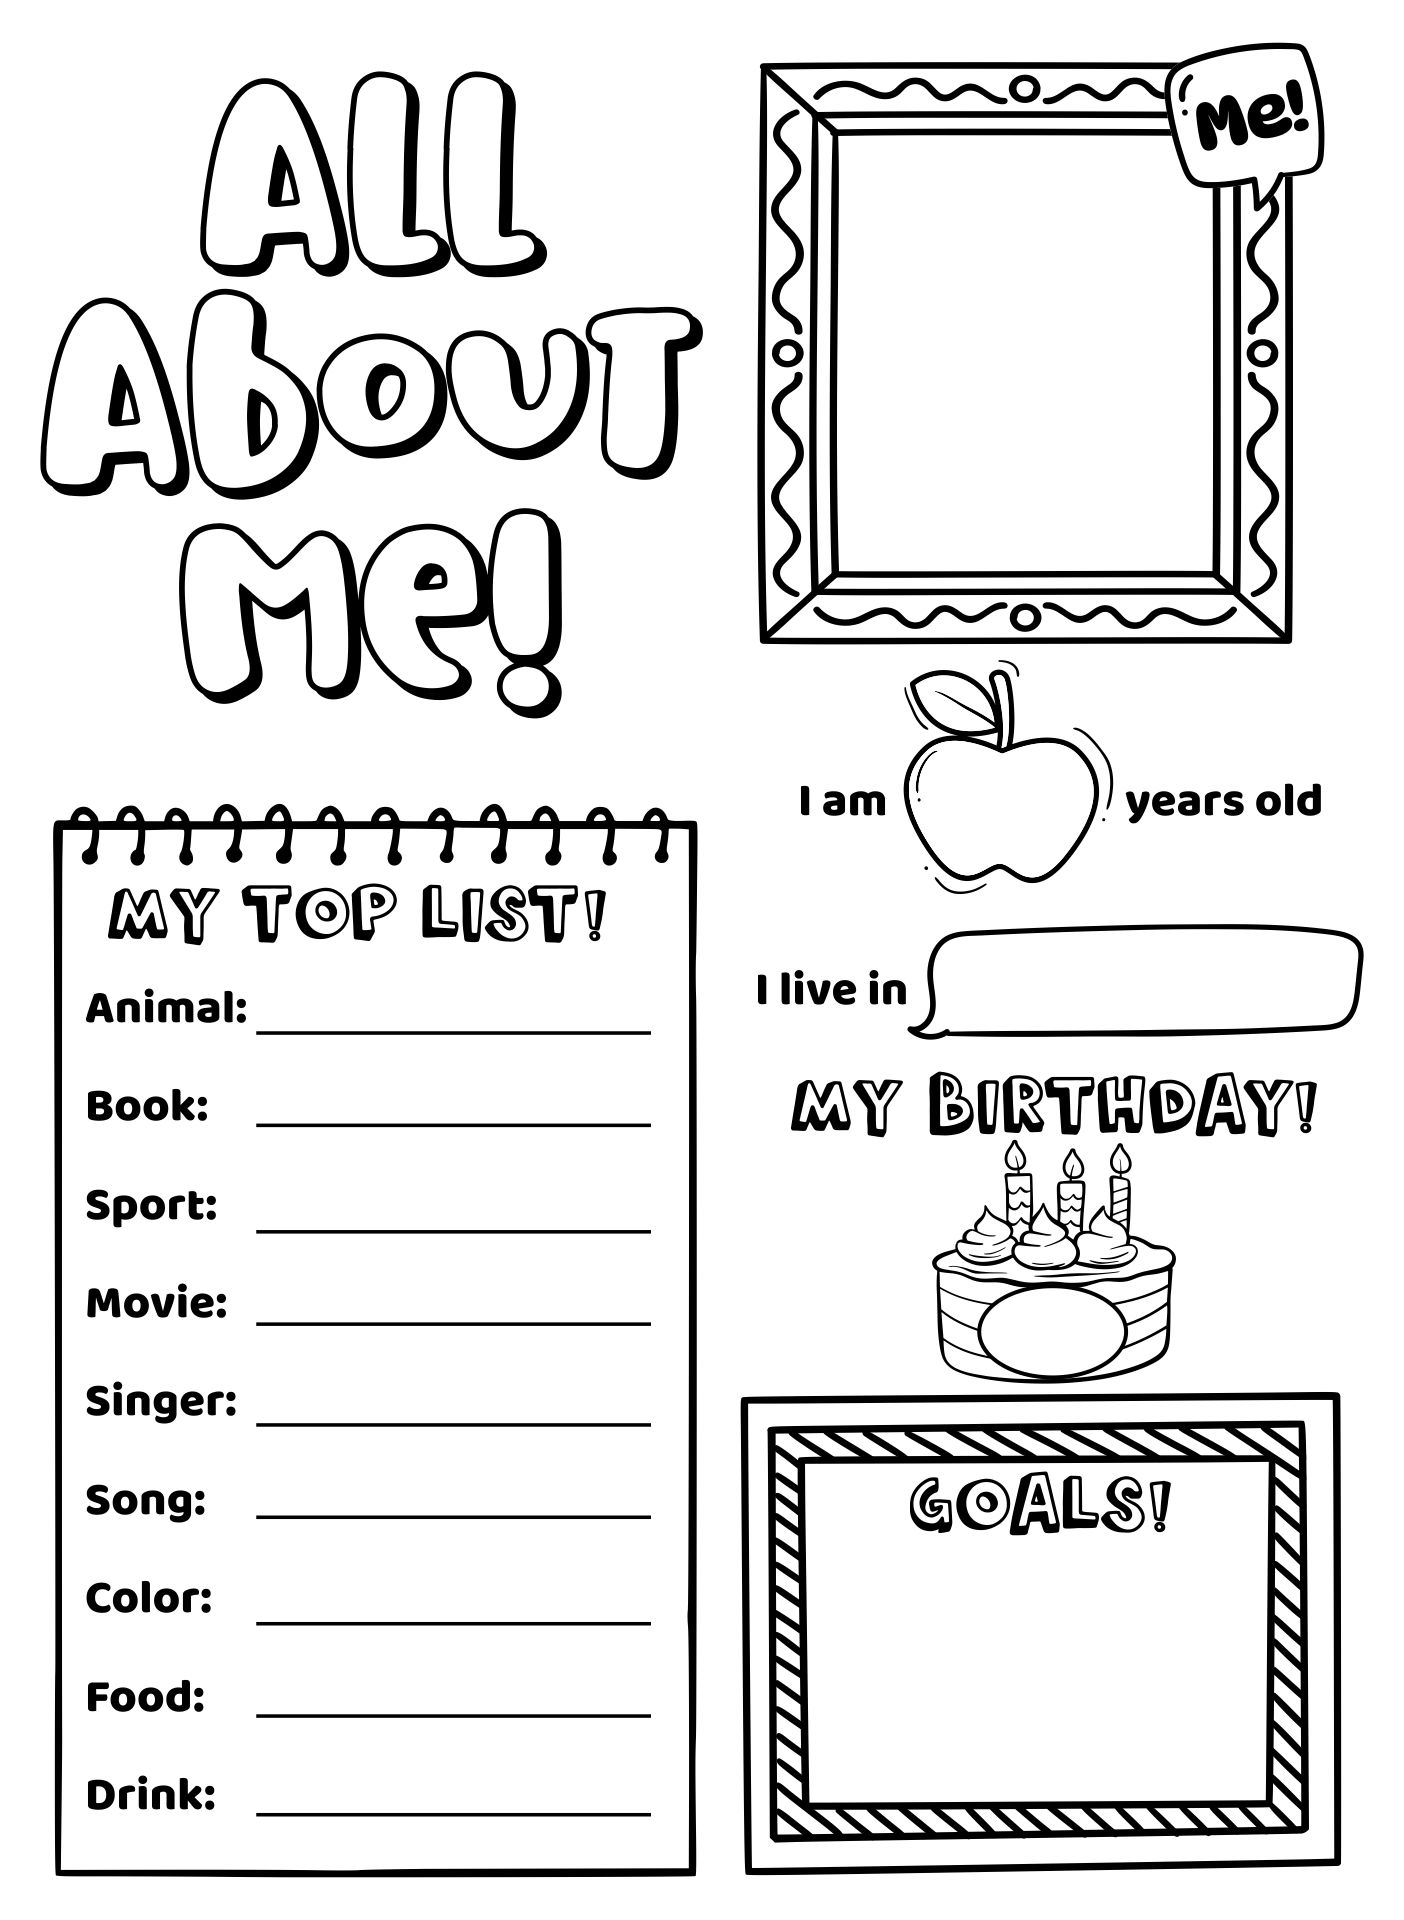 All About Me Worksheet Printable For Kids